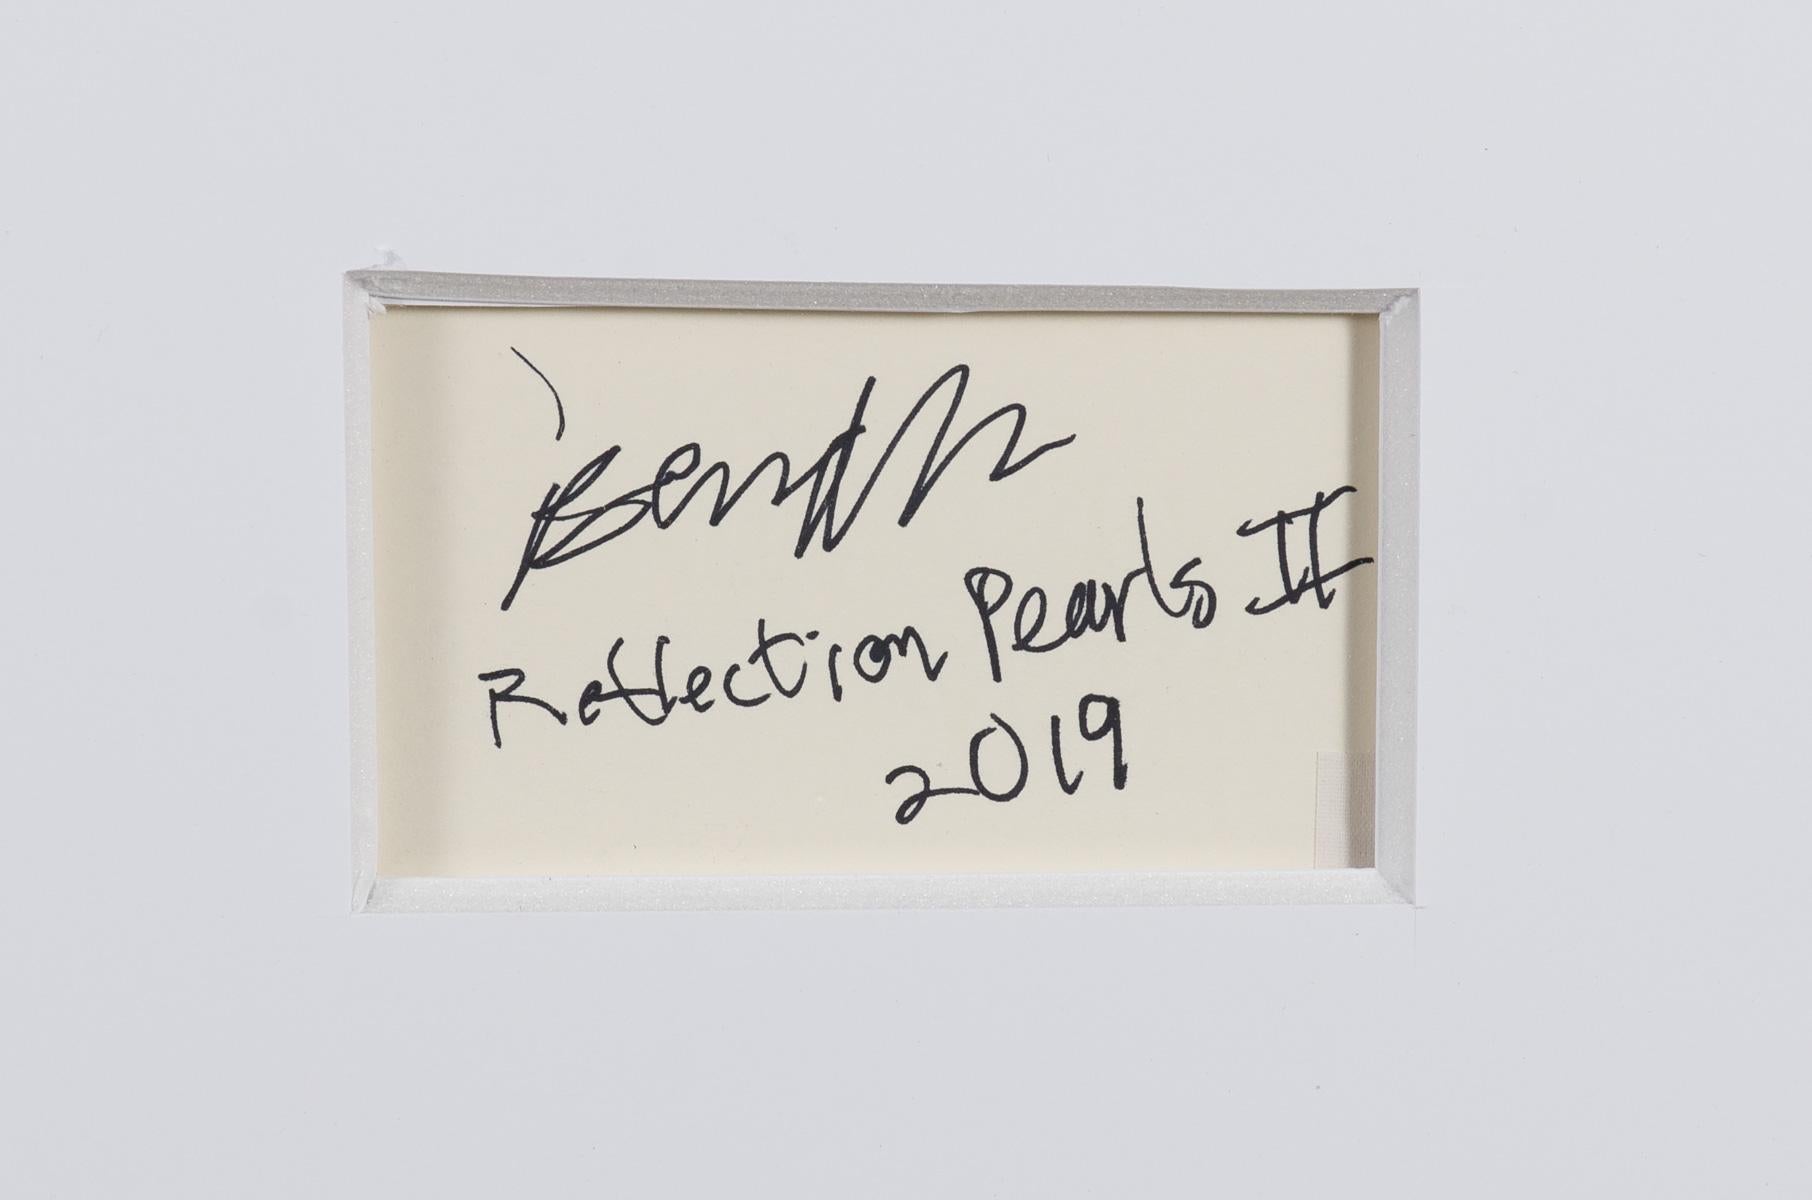 Reflection Pearls II is an oil painting on prepared paper, sheet size 29.75 x 41.25 inches, signed, titled and dated verso, 'Ben Weiner Reflection Pearls II 2019' and framed in a contemporary white frame.

Connecting two opposing styles—abstraction